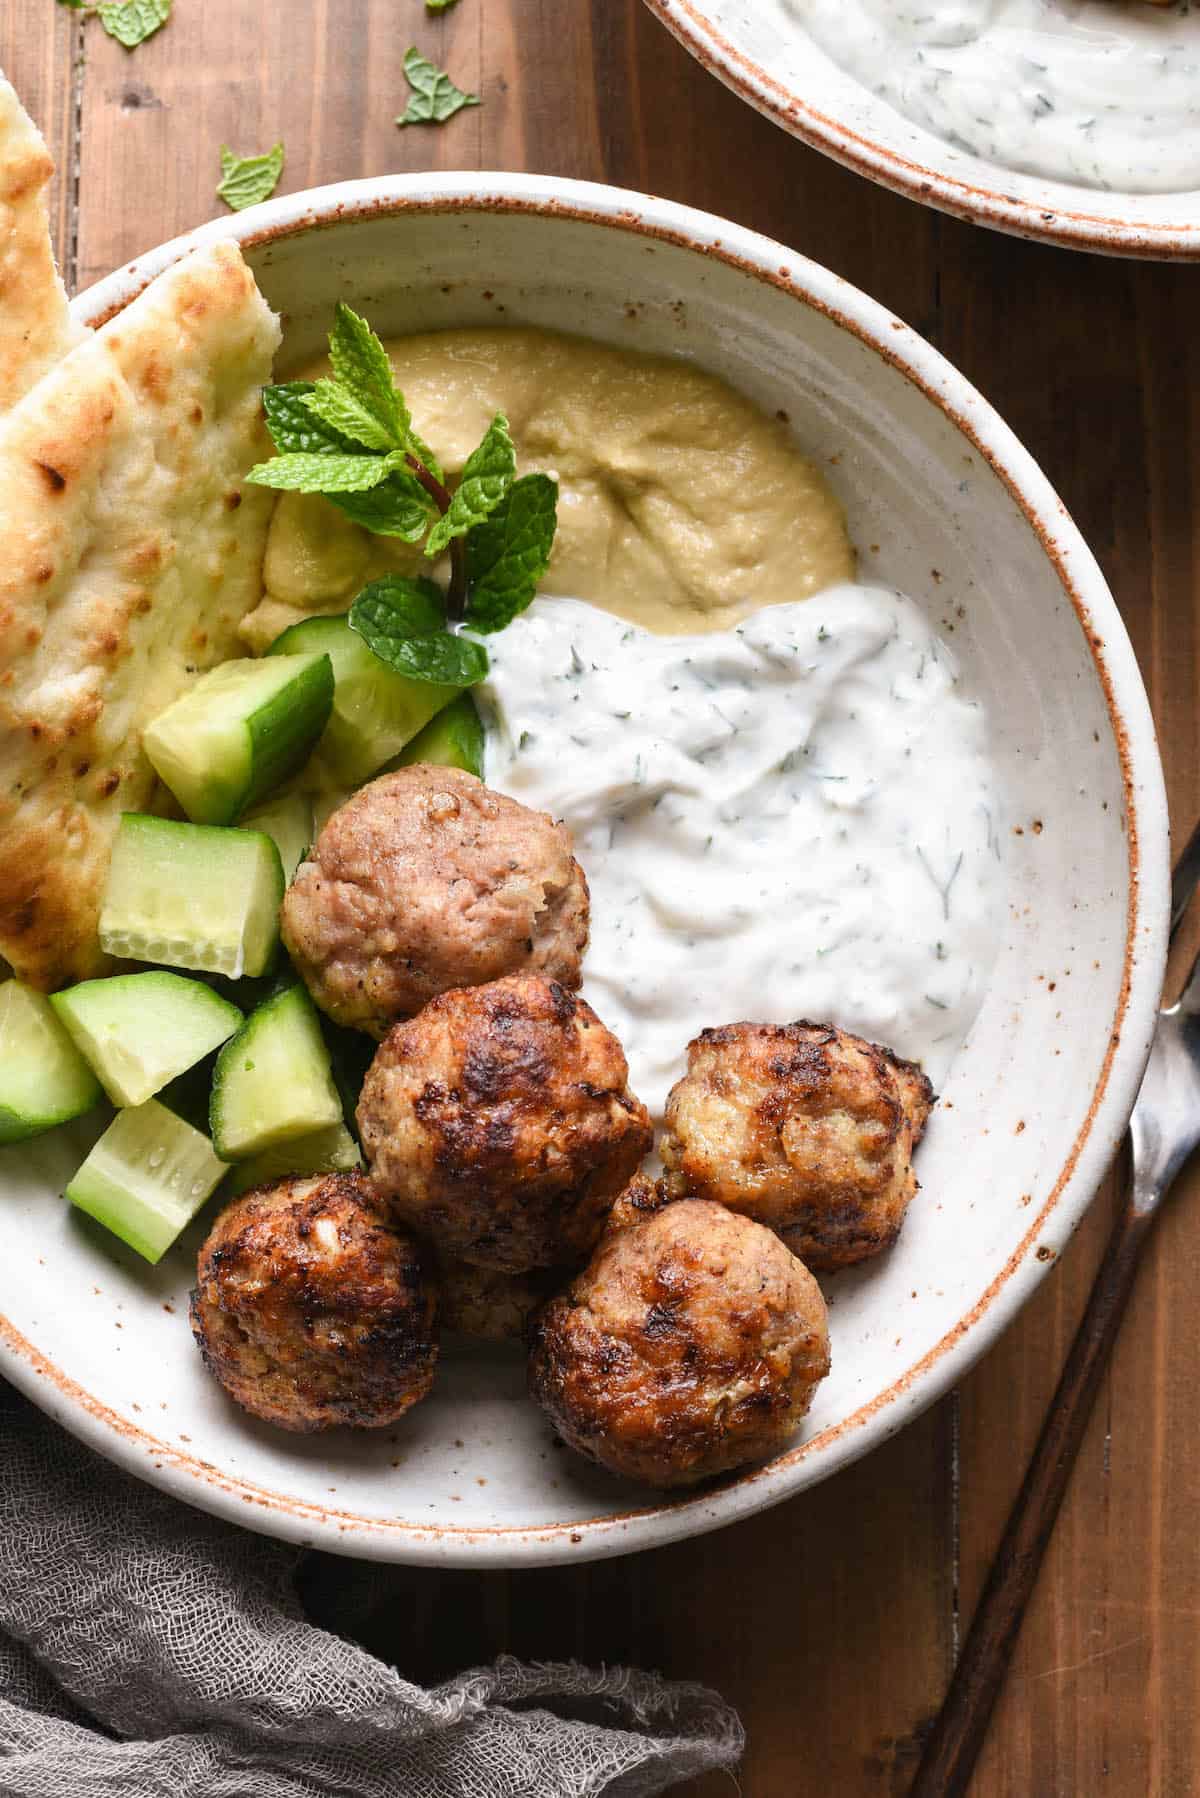 Overhead photo of rustic bowl filled with turkey meatballs, chopped cucumber, hummus, yogurt sauce, naan and a mint sprig garnish.